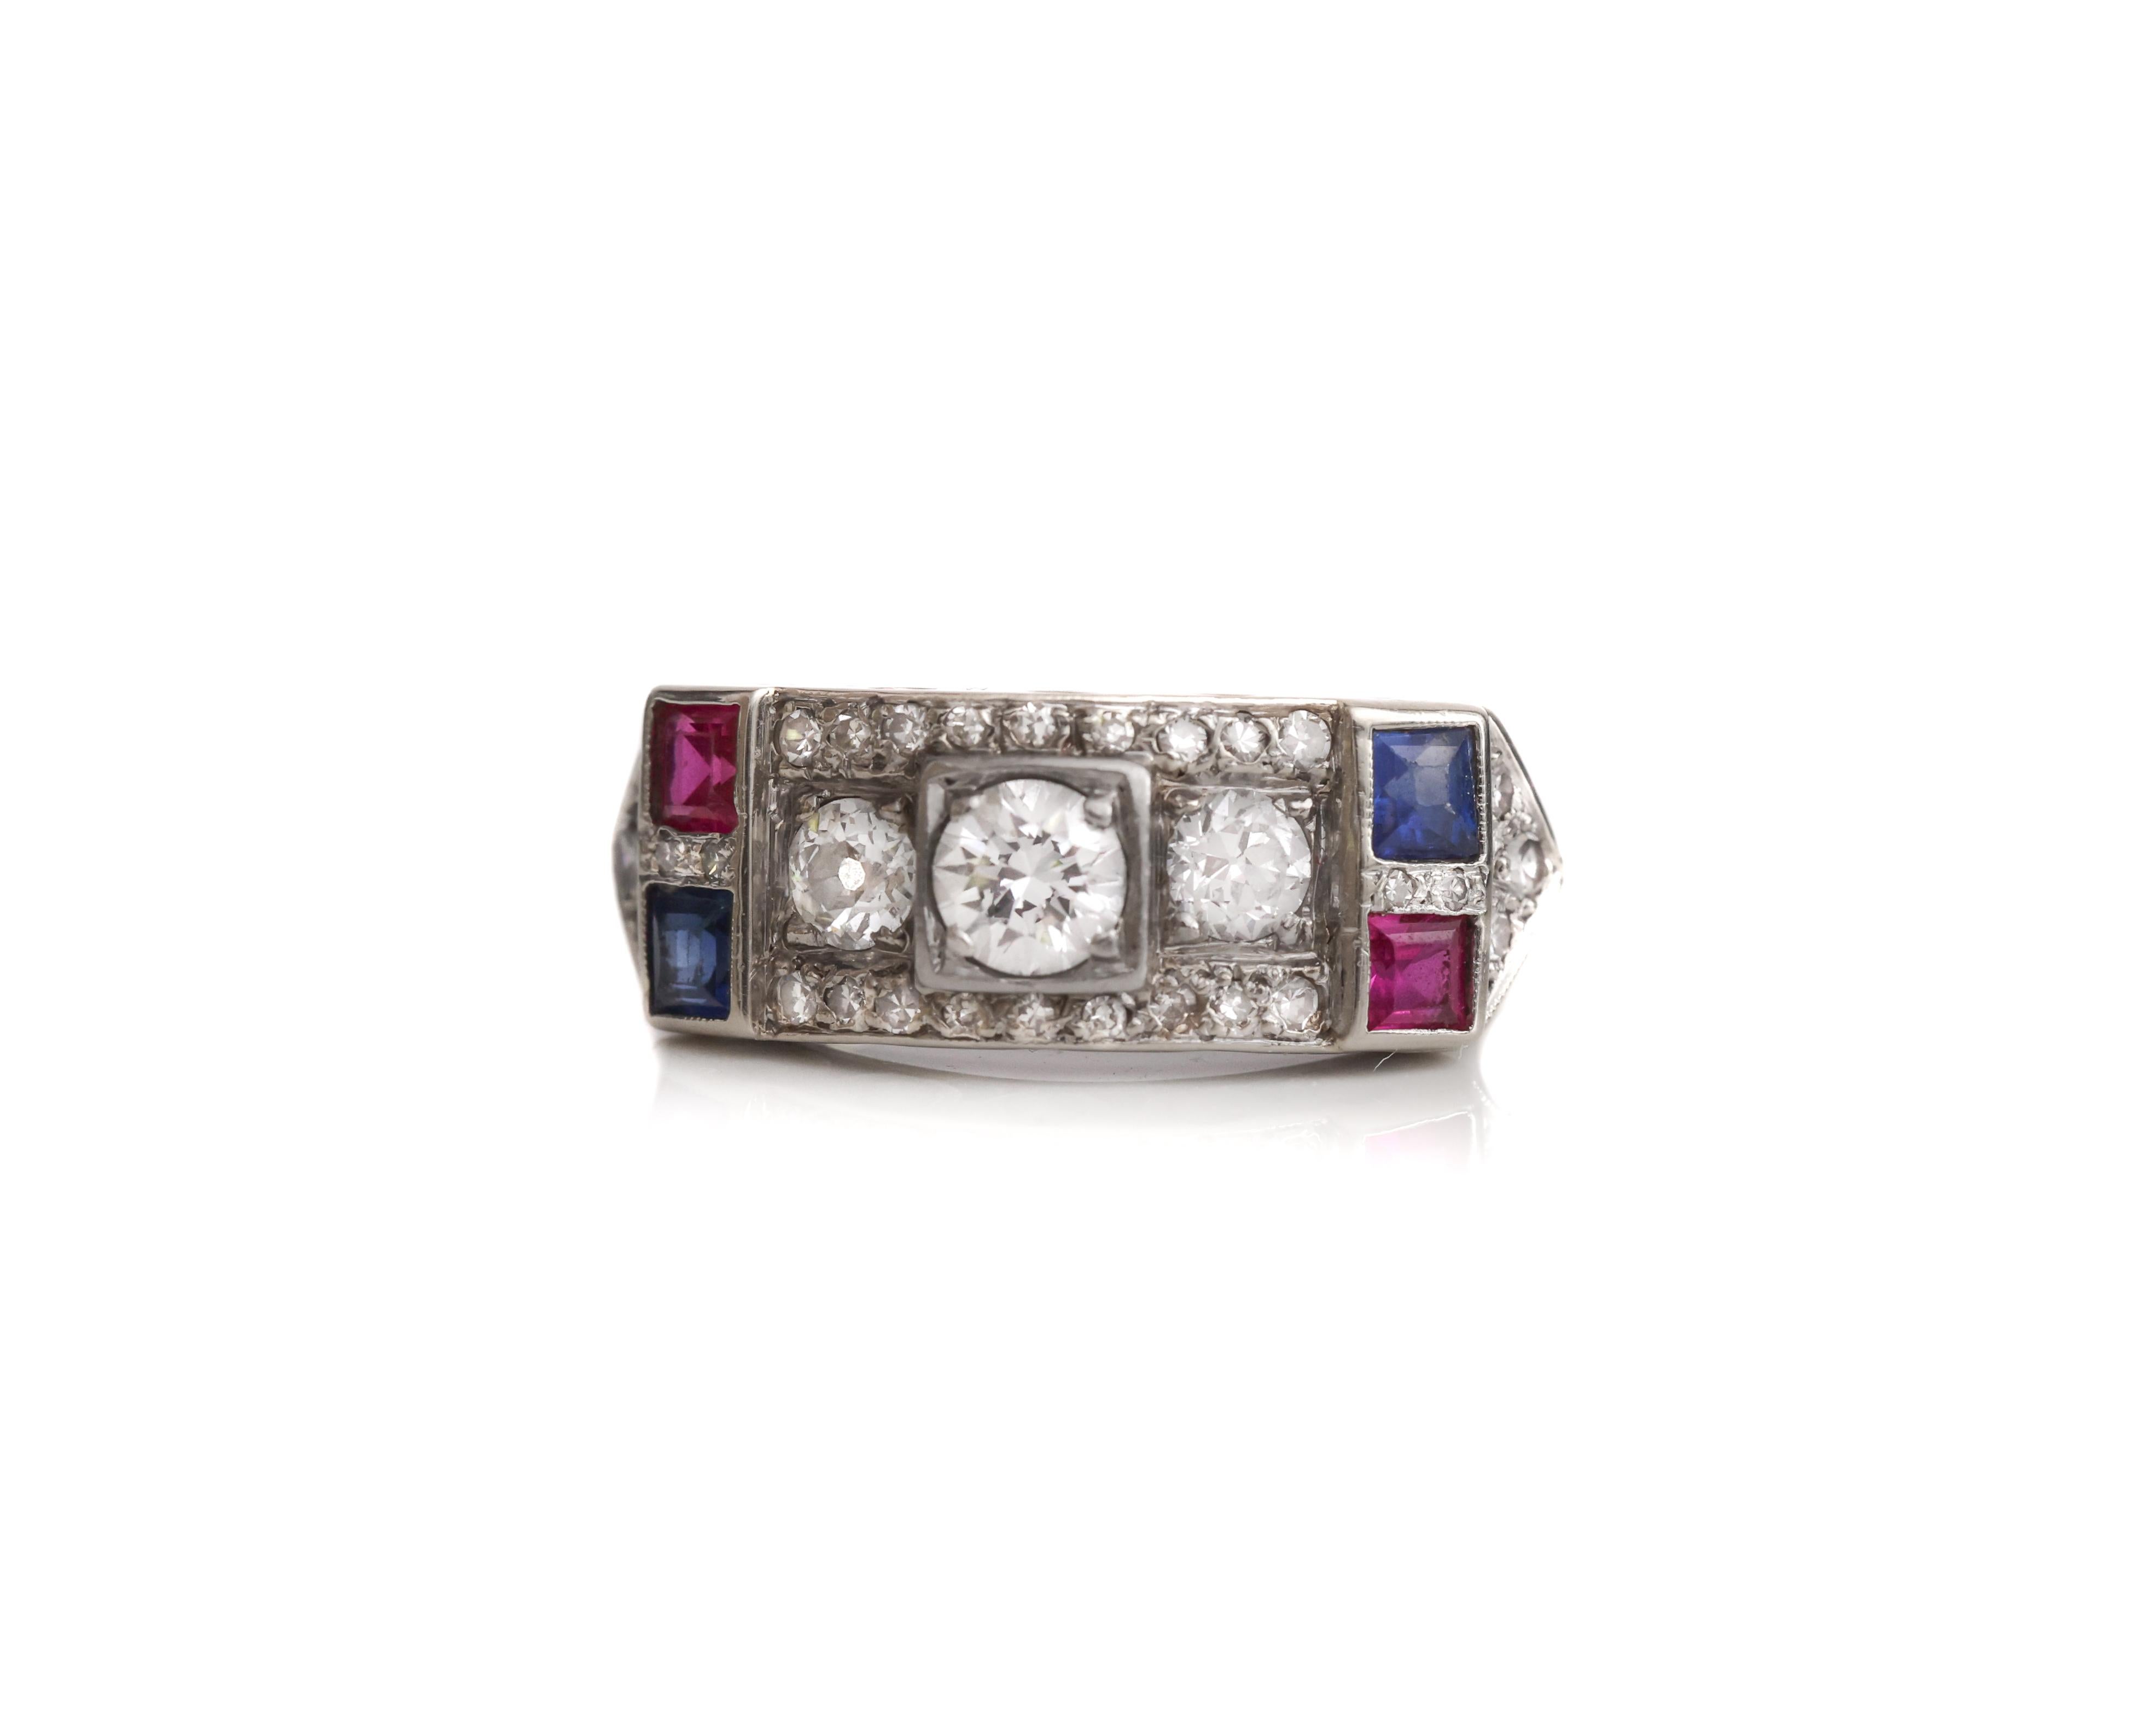 Ruby Sapphire Diamond Art Deco Ring 

Ring Details:
Metal Type: 14 Karat White Gold
Weight: 4.9 grams
Ring Size: 8 (Resizable)
Circa 1930s, Art Deco

Diamond Details:
Cut: Old European
Color: G
Clarity: VS
Carat: .80 carat

.80 Carat Ruby and